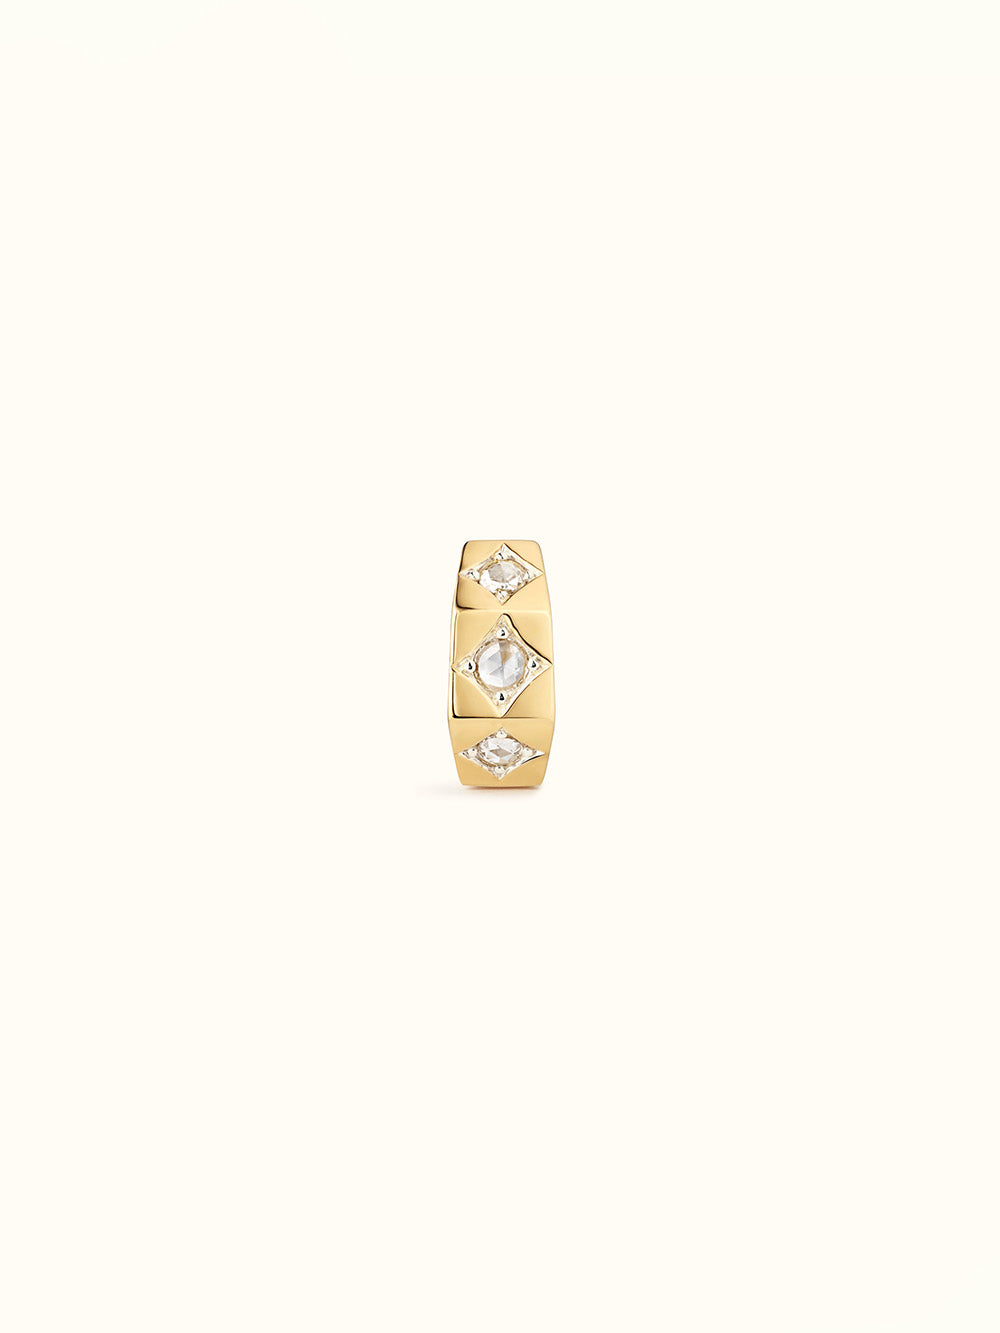 SMALL YELLOW GOLD AND DIAMOND NUT EARRING